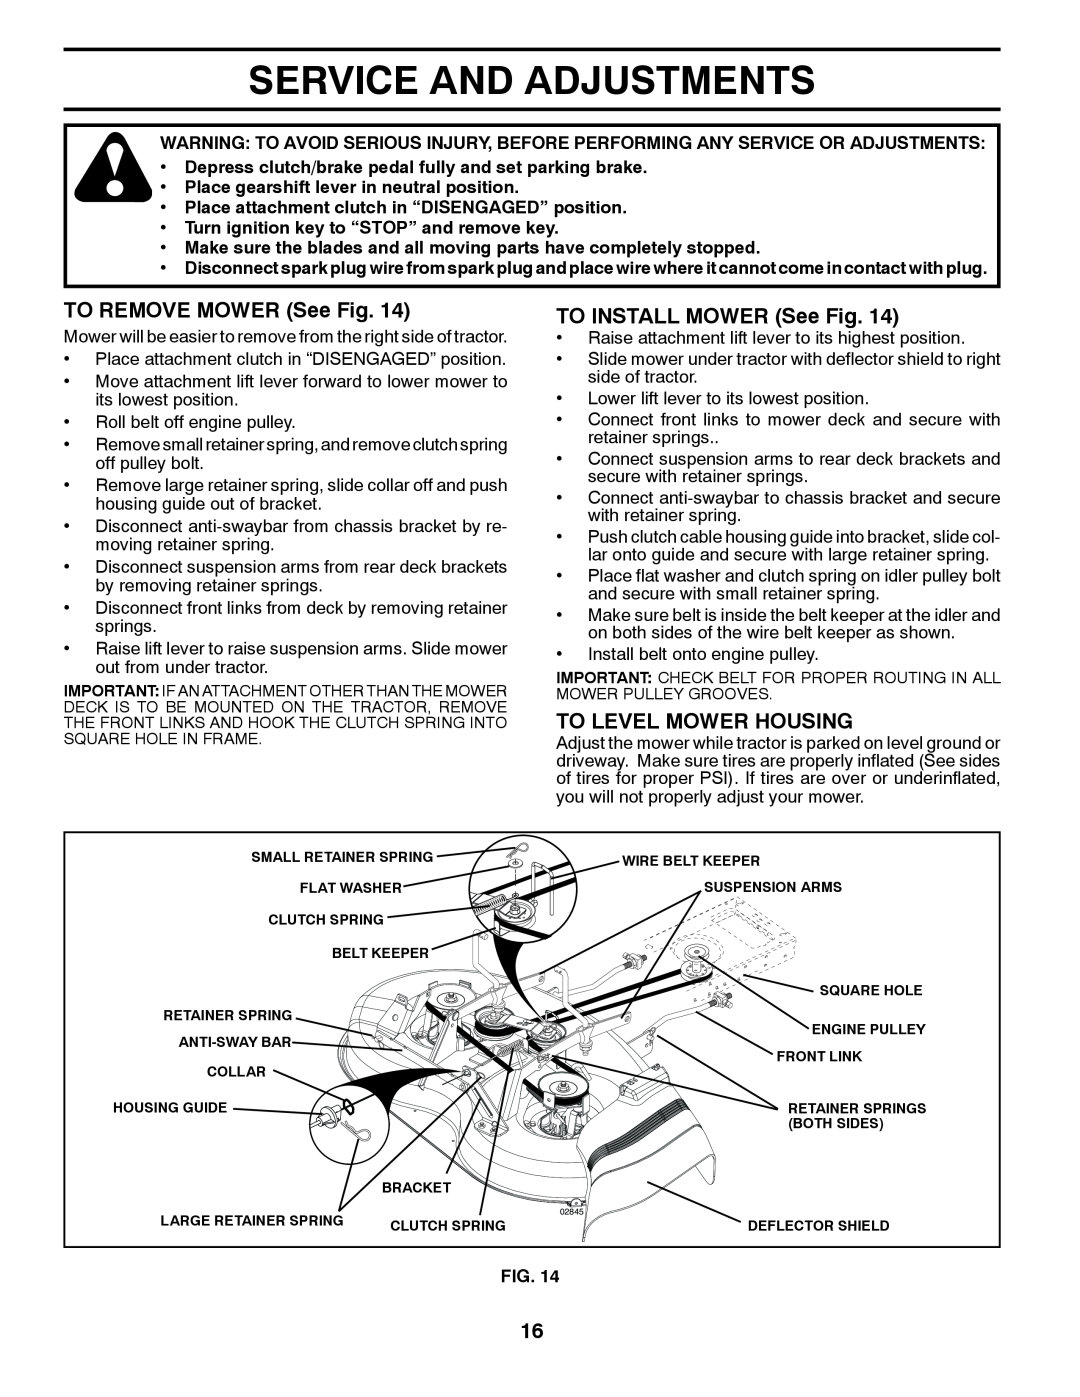 Poulan 424368 manual Service And Adjustments, TO REMOVE MOWER See Fig, TO INSTALL MOWER See Fig, To Level Mower Housing 